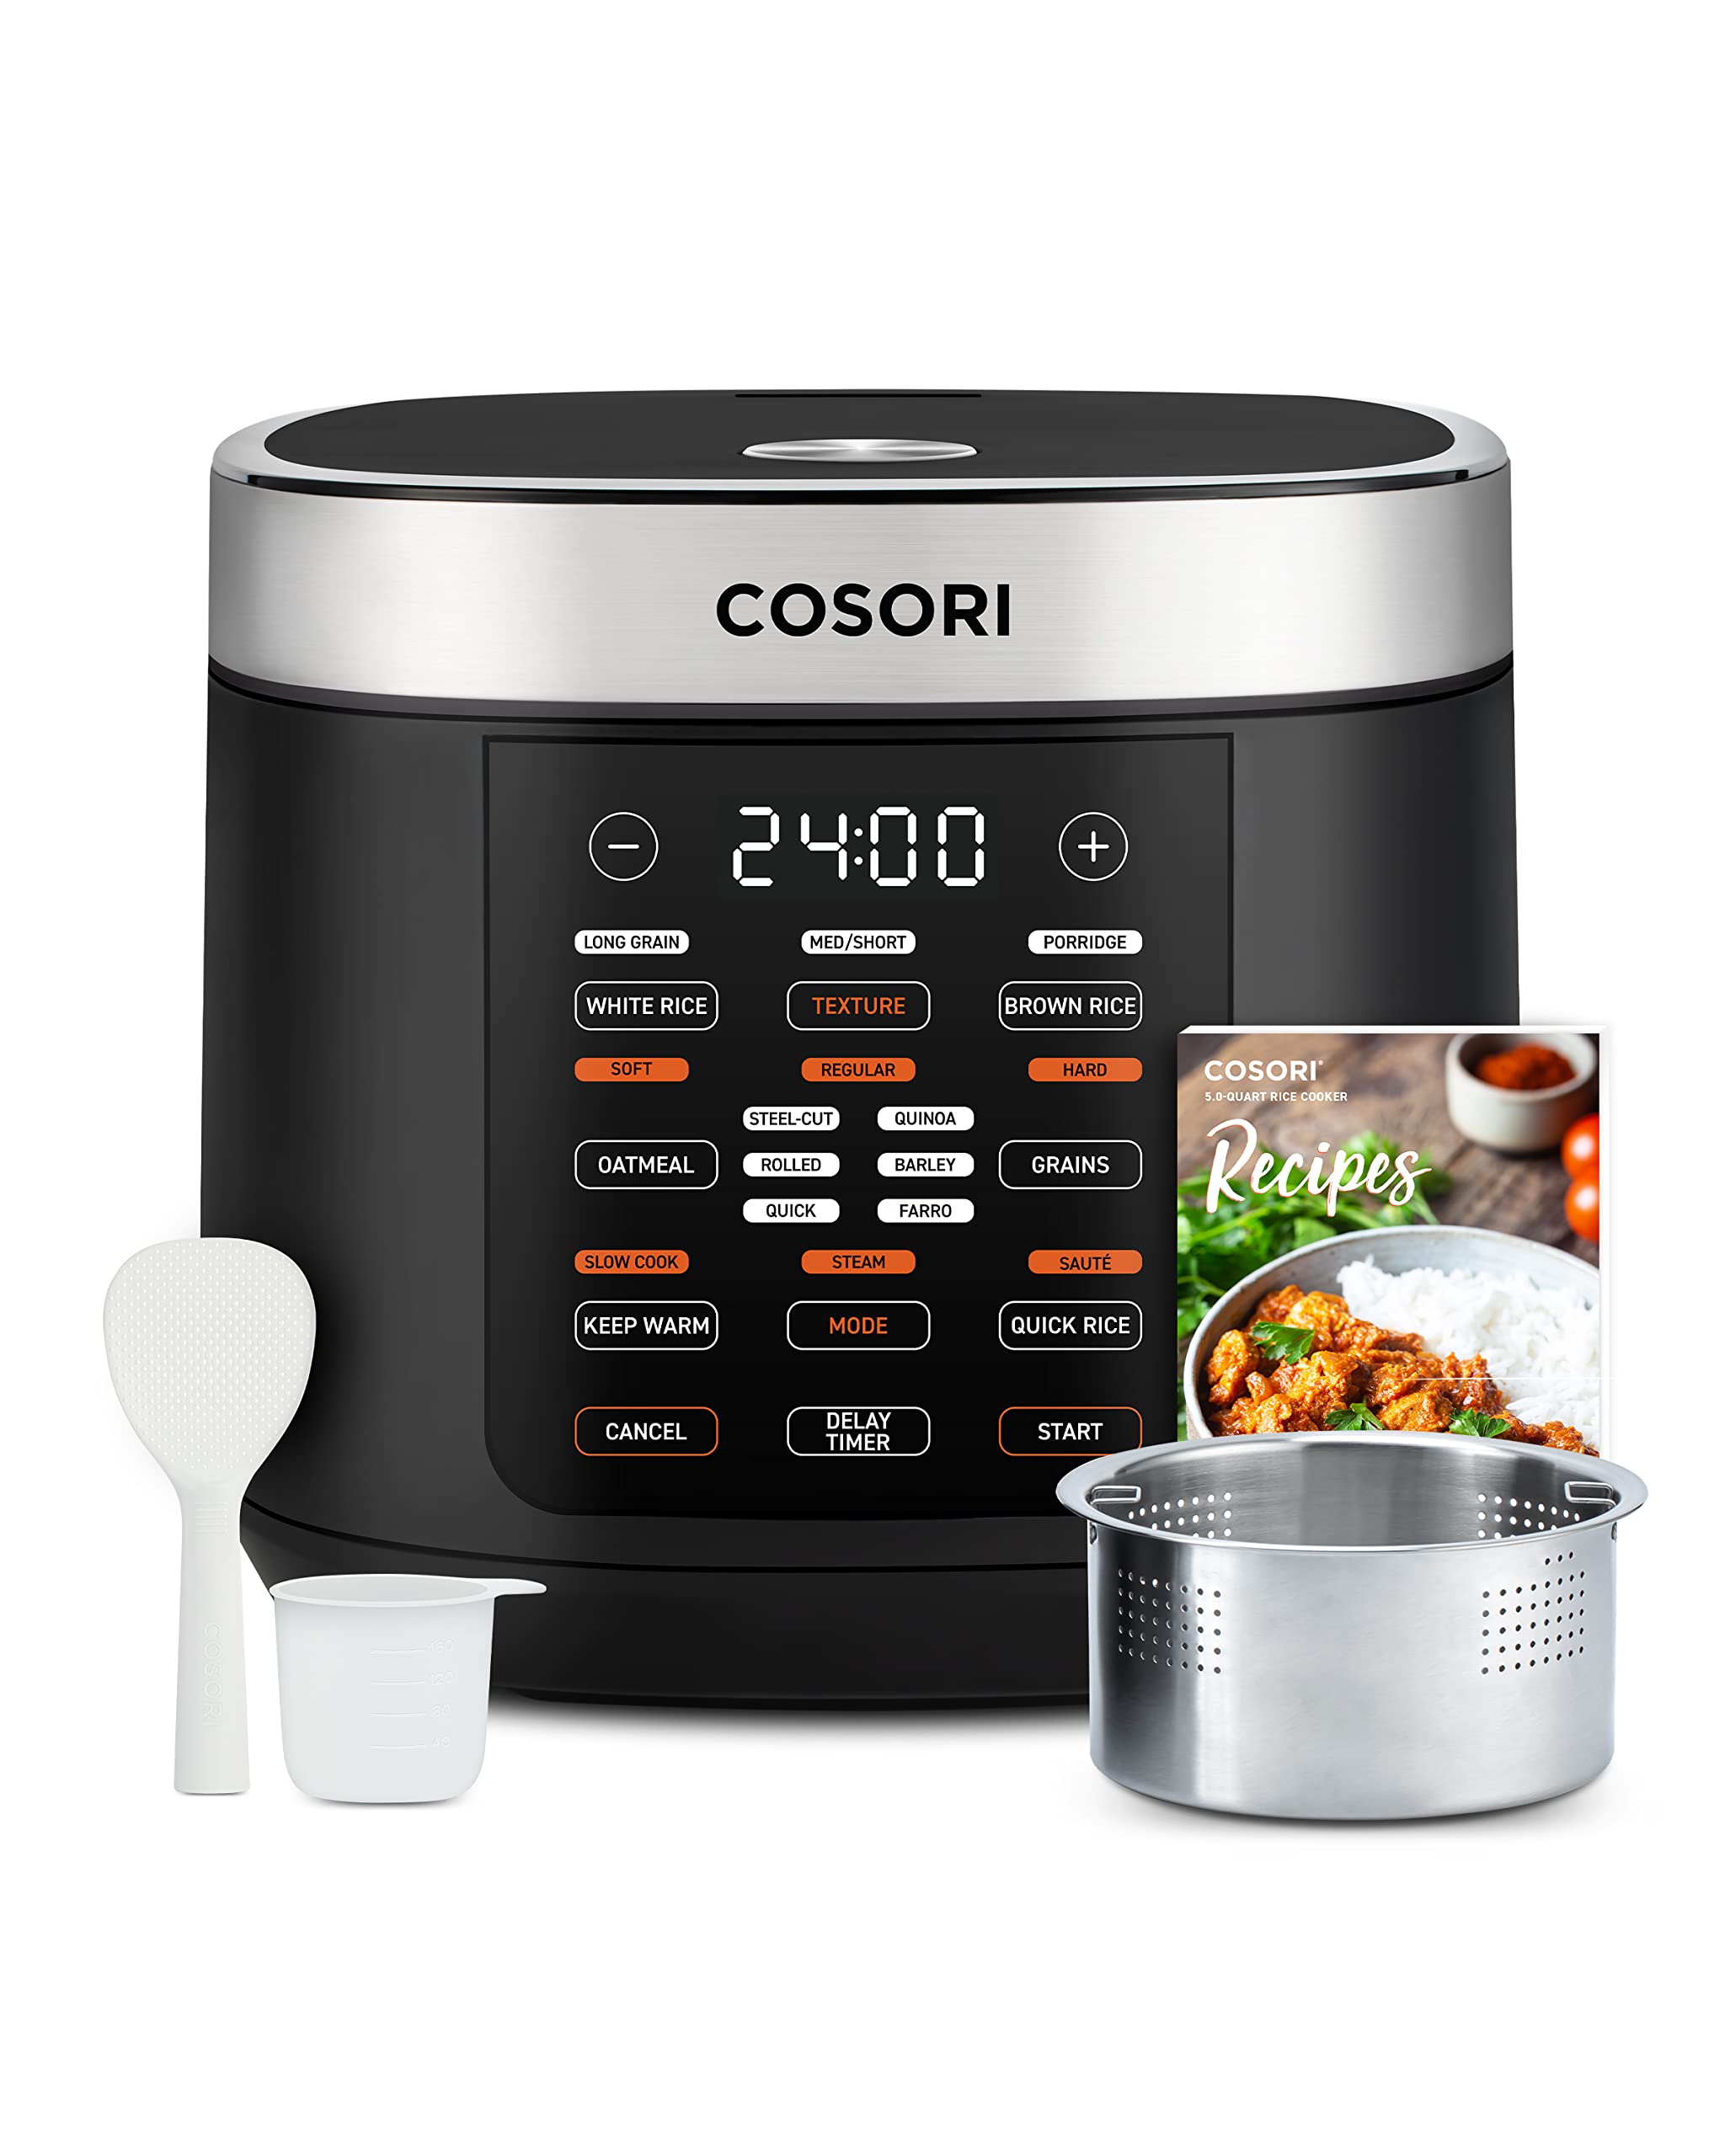 cOSORI Rice cooker 10 cup Uncooked Rice Maker with 18 cooking Functions,  Advanced Fuzzy Logic Micom Technology, Texture Optional